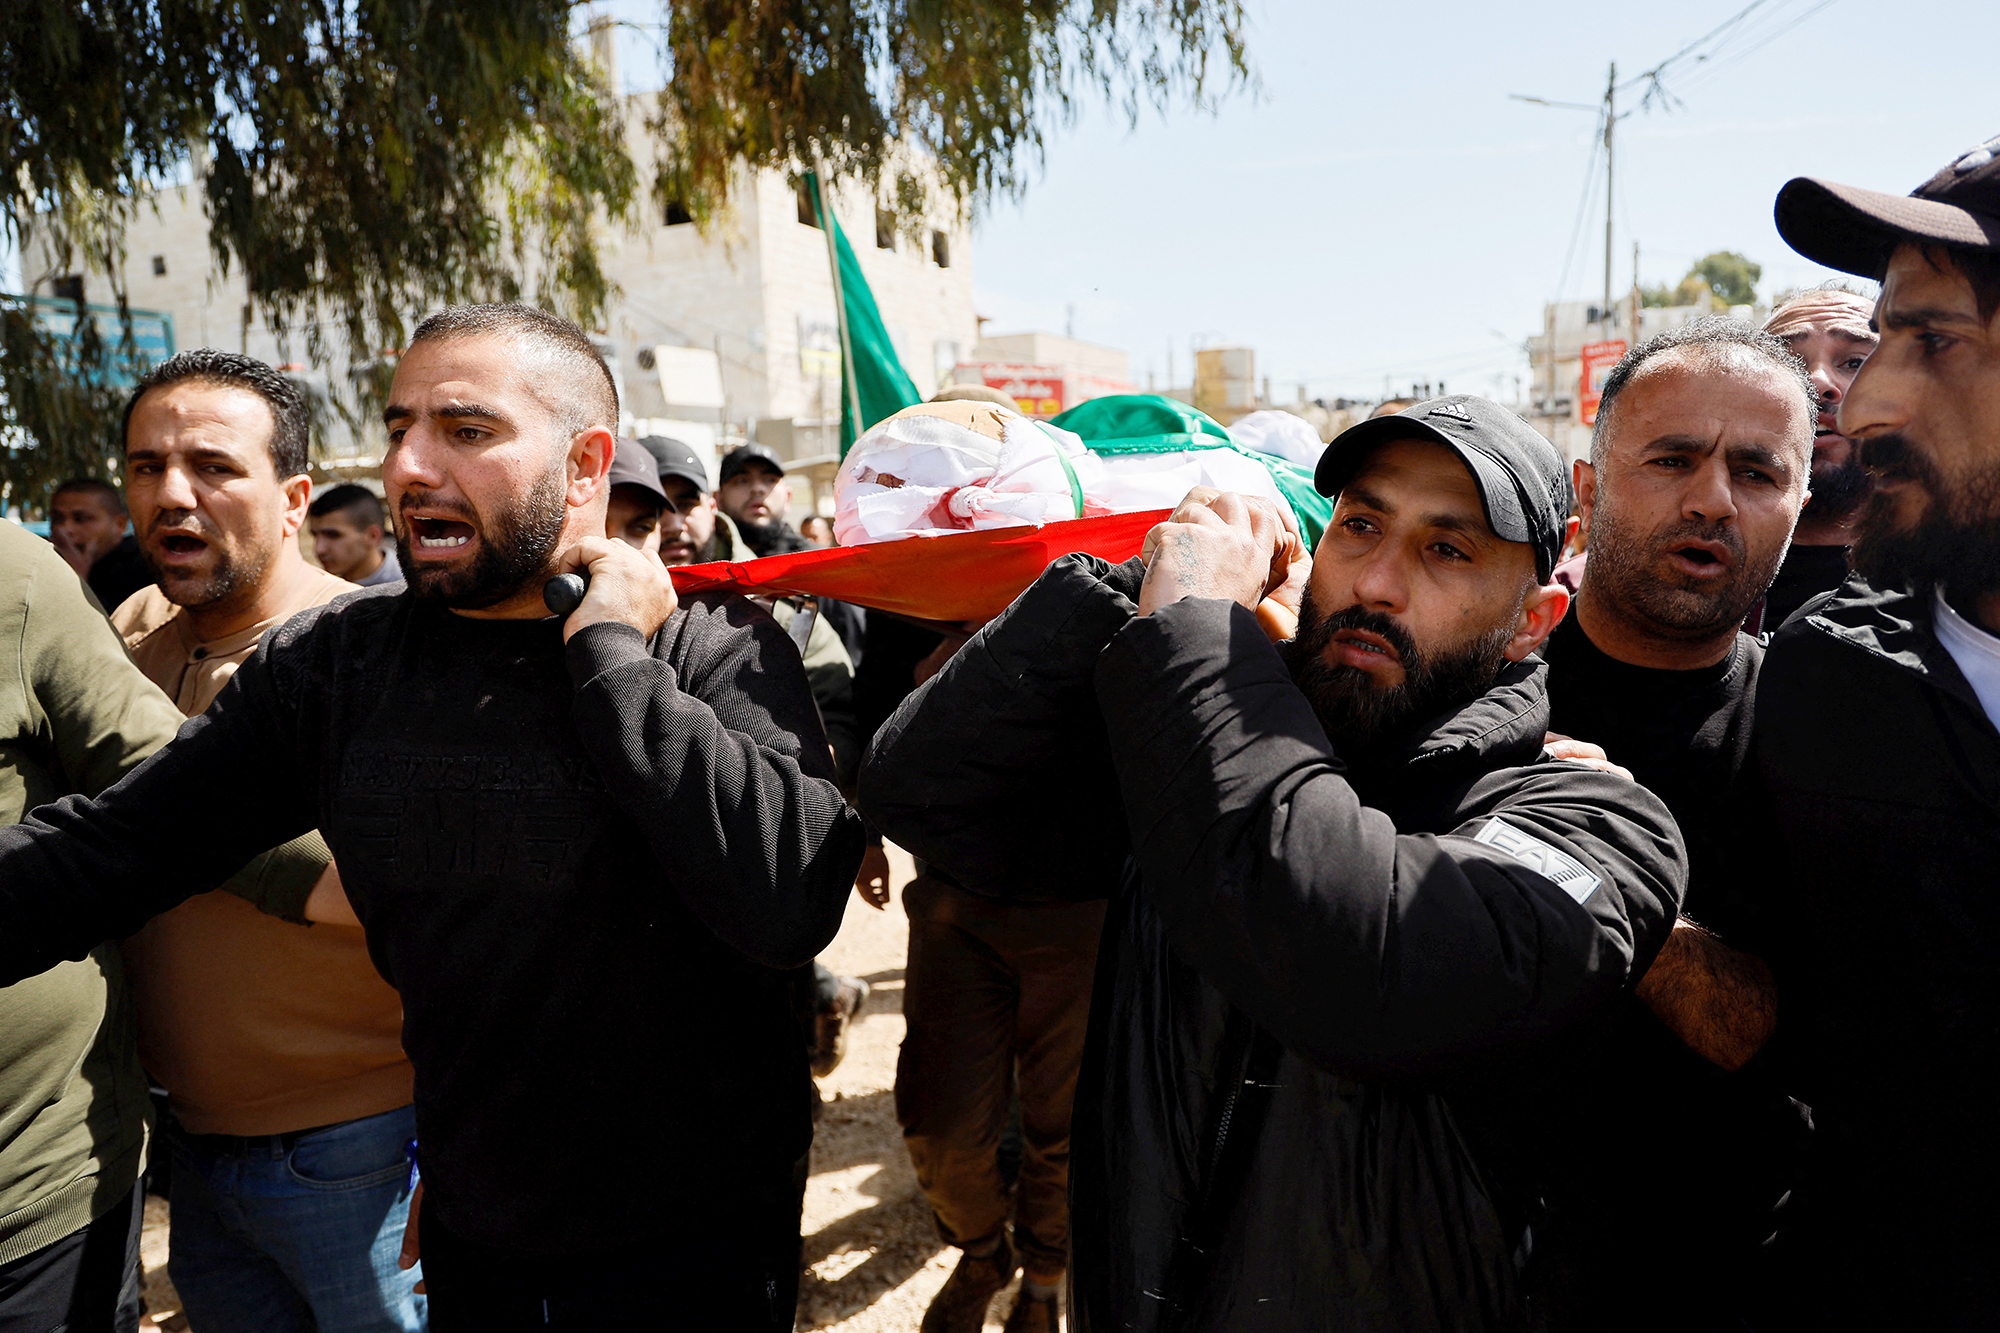 Mourners carry the body of one of two Palestinians who were killed at a yard outside a hospital during an Israeli raid in the Israeli-occupied West Bank, on March 13.